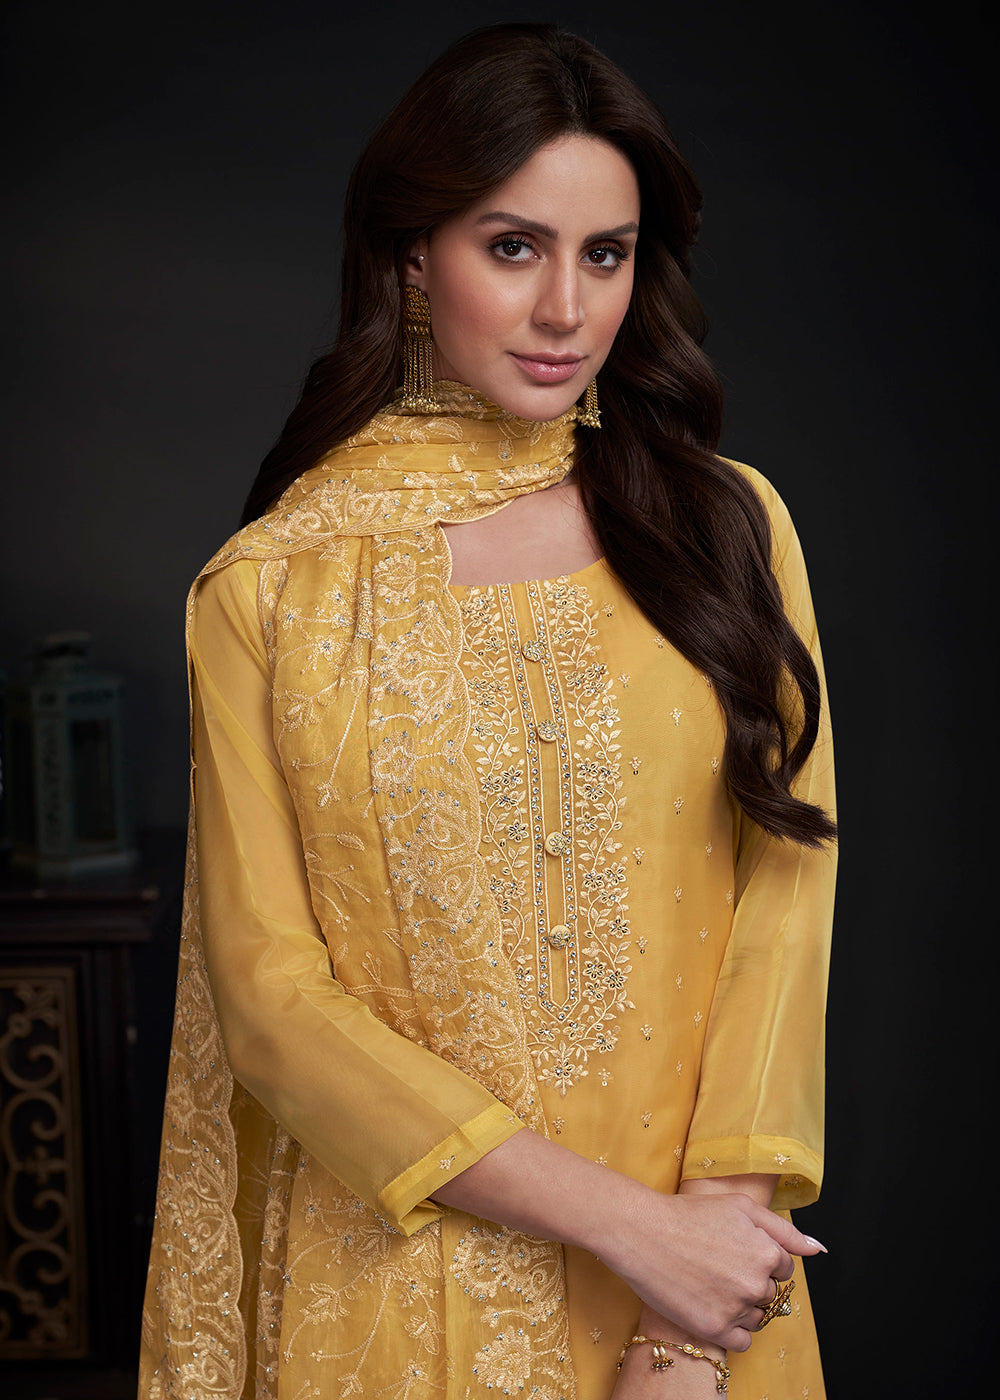 Buy Now Adorning Yellow Embroidered Organza Festive Pant Style Salwar Suit Online in USA, UK, Canada, Germany, Australia & Worldwide at Empress Clothing